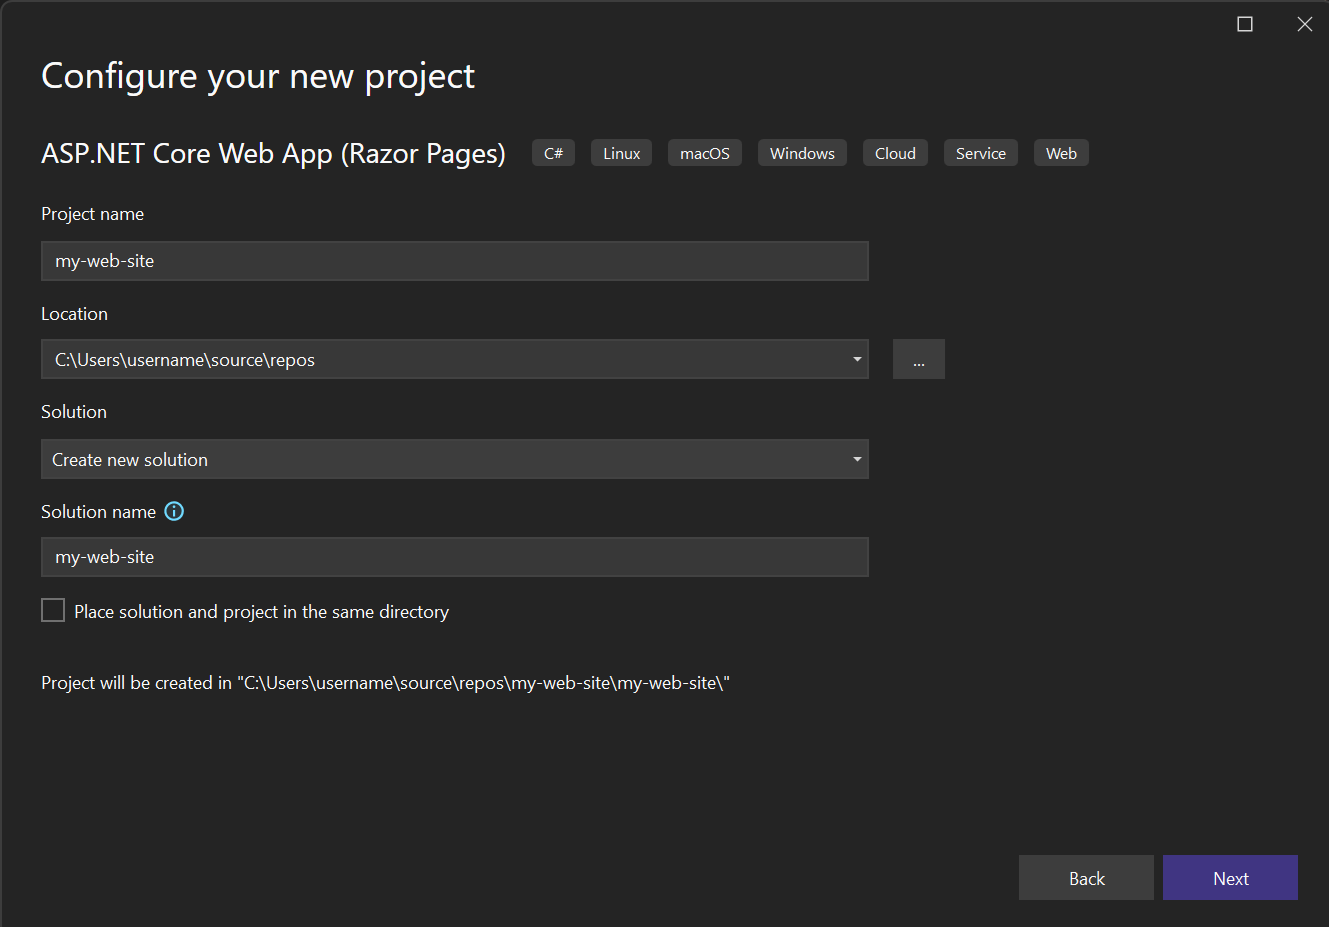 Screenshot of the 'Configure your new project' dialog in Visual Studio 2022.